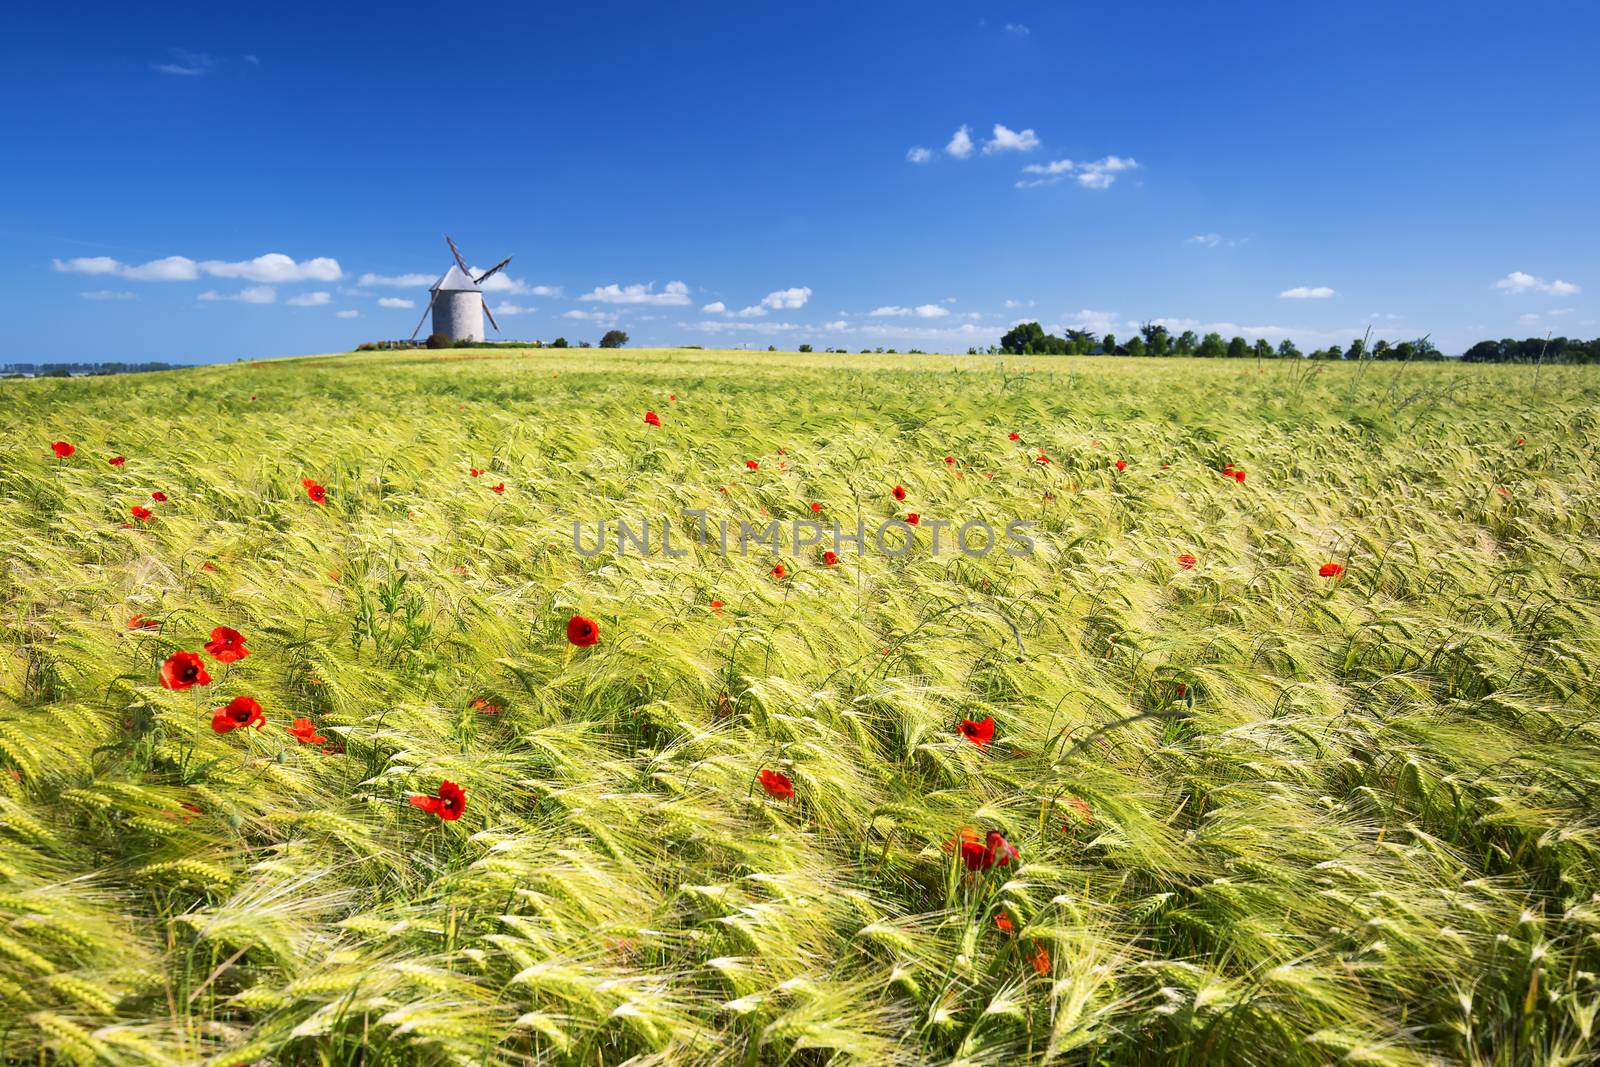 View of windmill and wheat field, France, Europe.